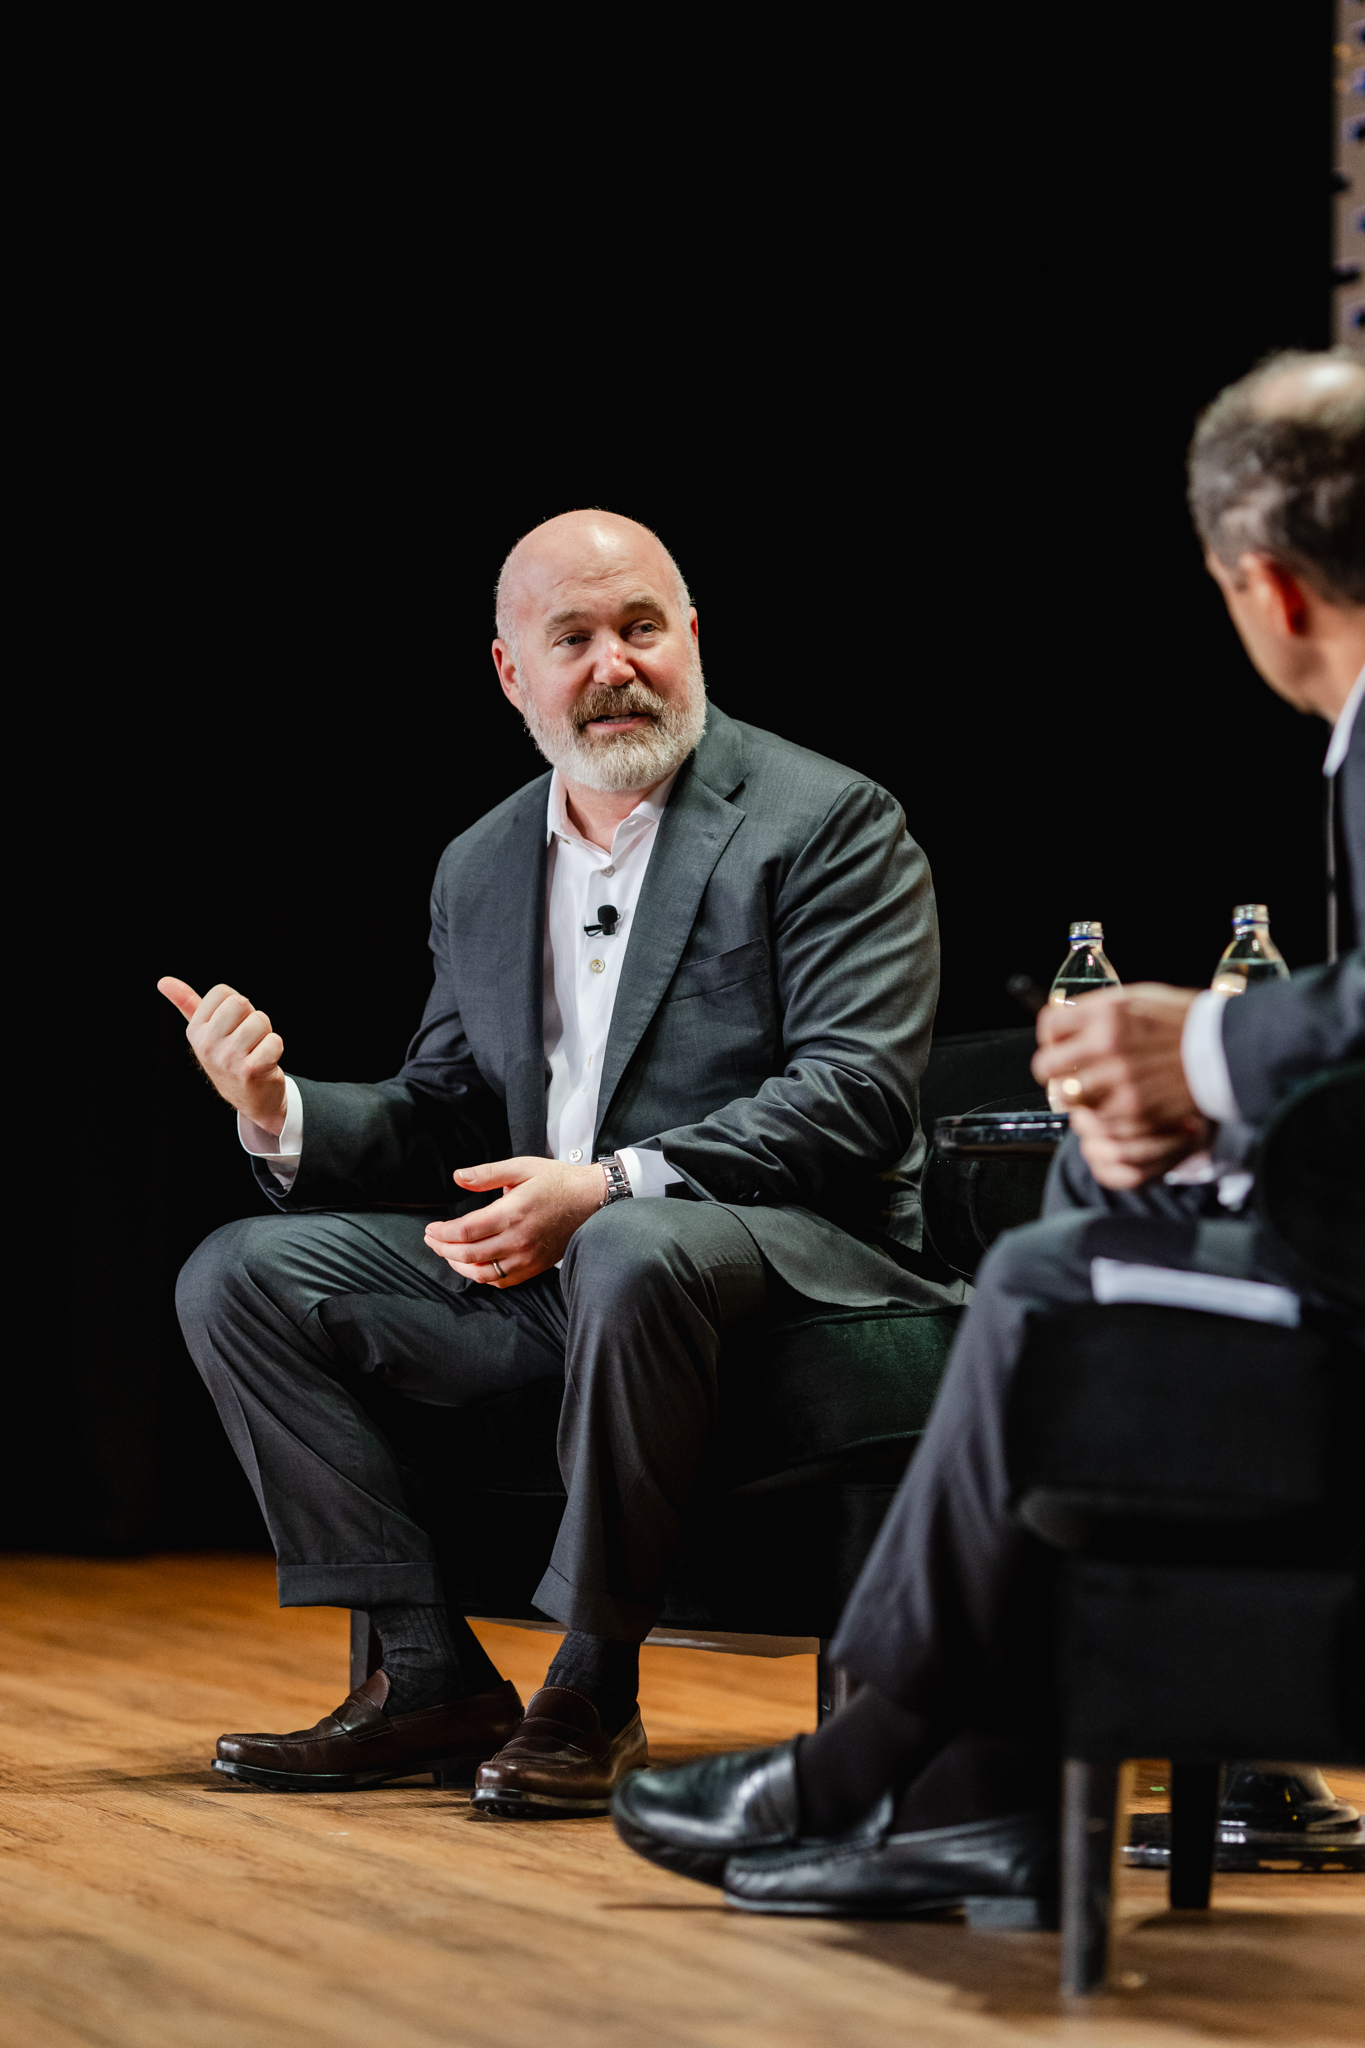 Two men engaged in a conference conversation on stage.